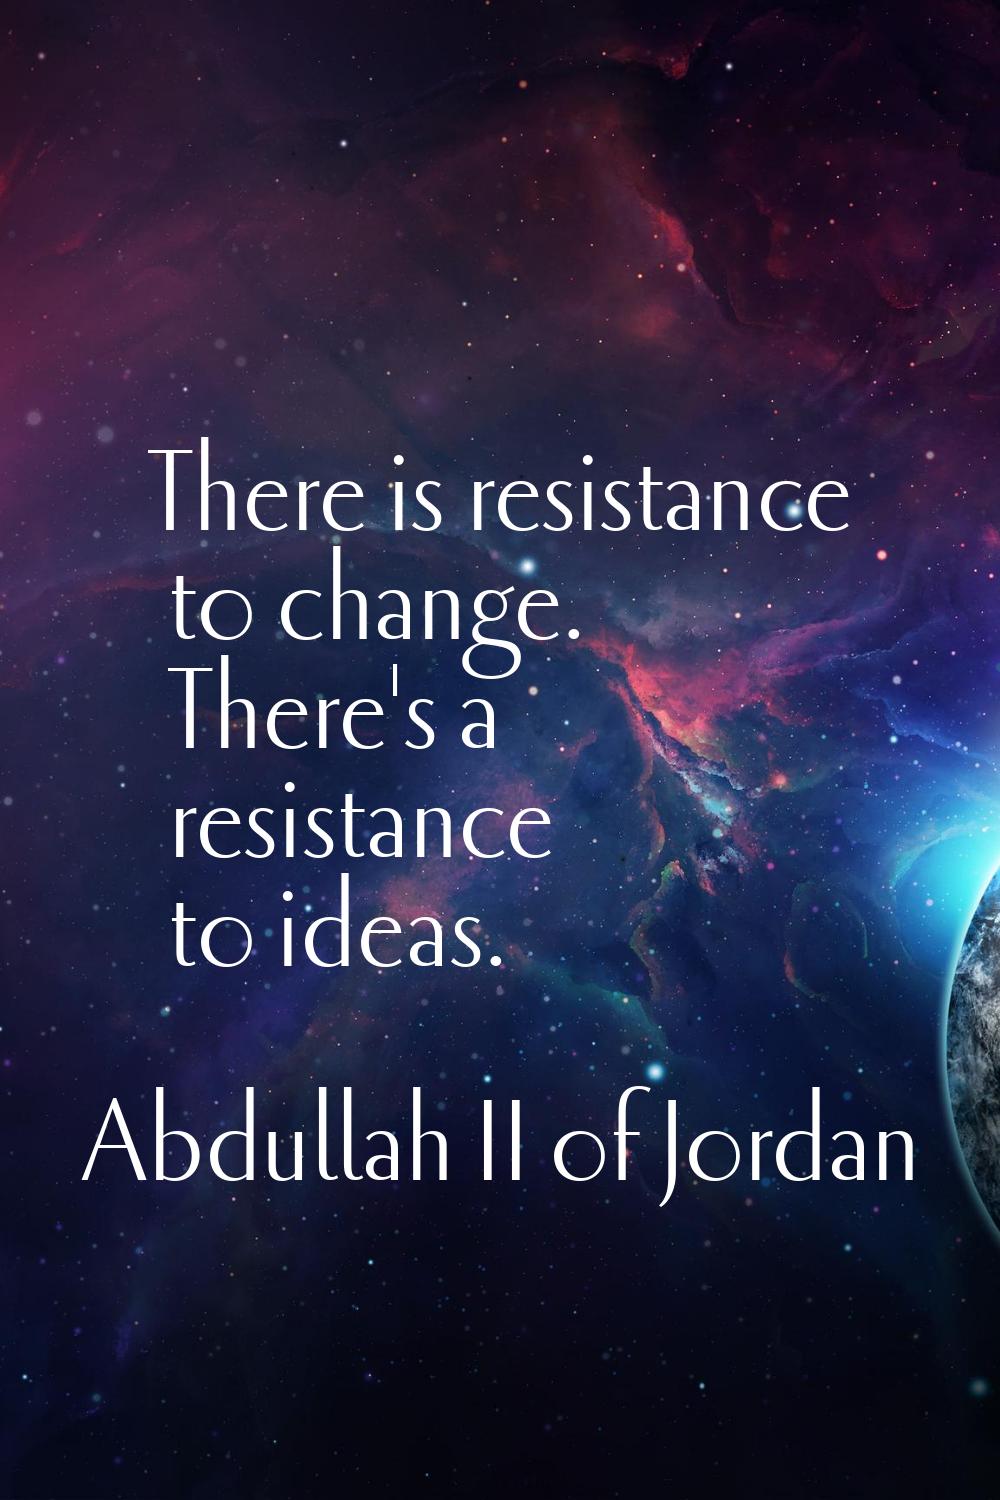 There is resistance to change. There's a resistance to ideas.